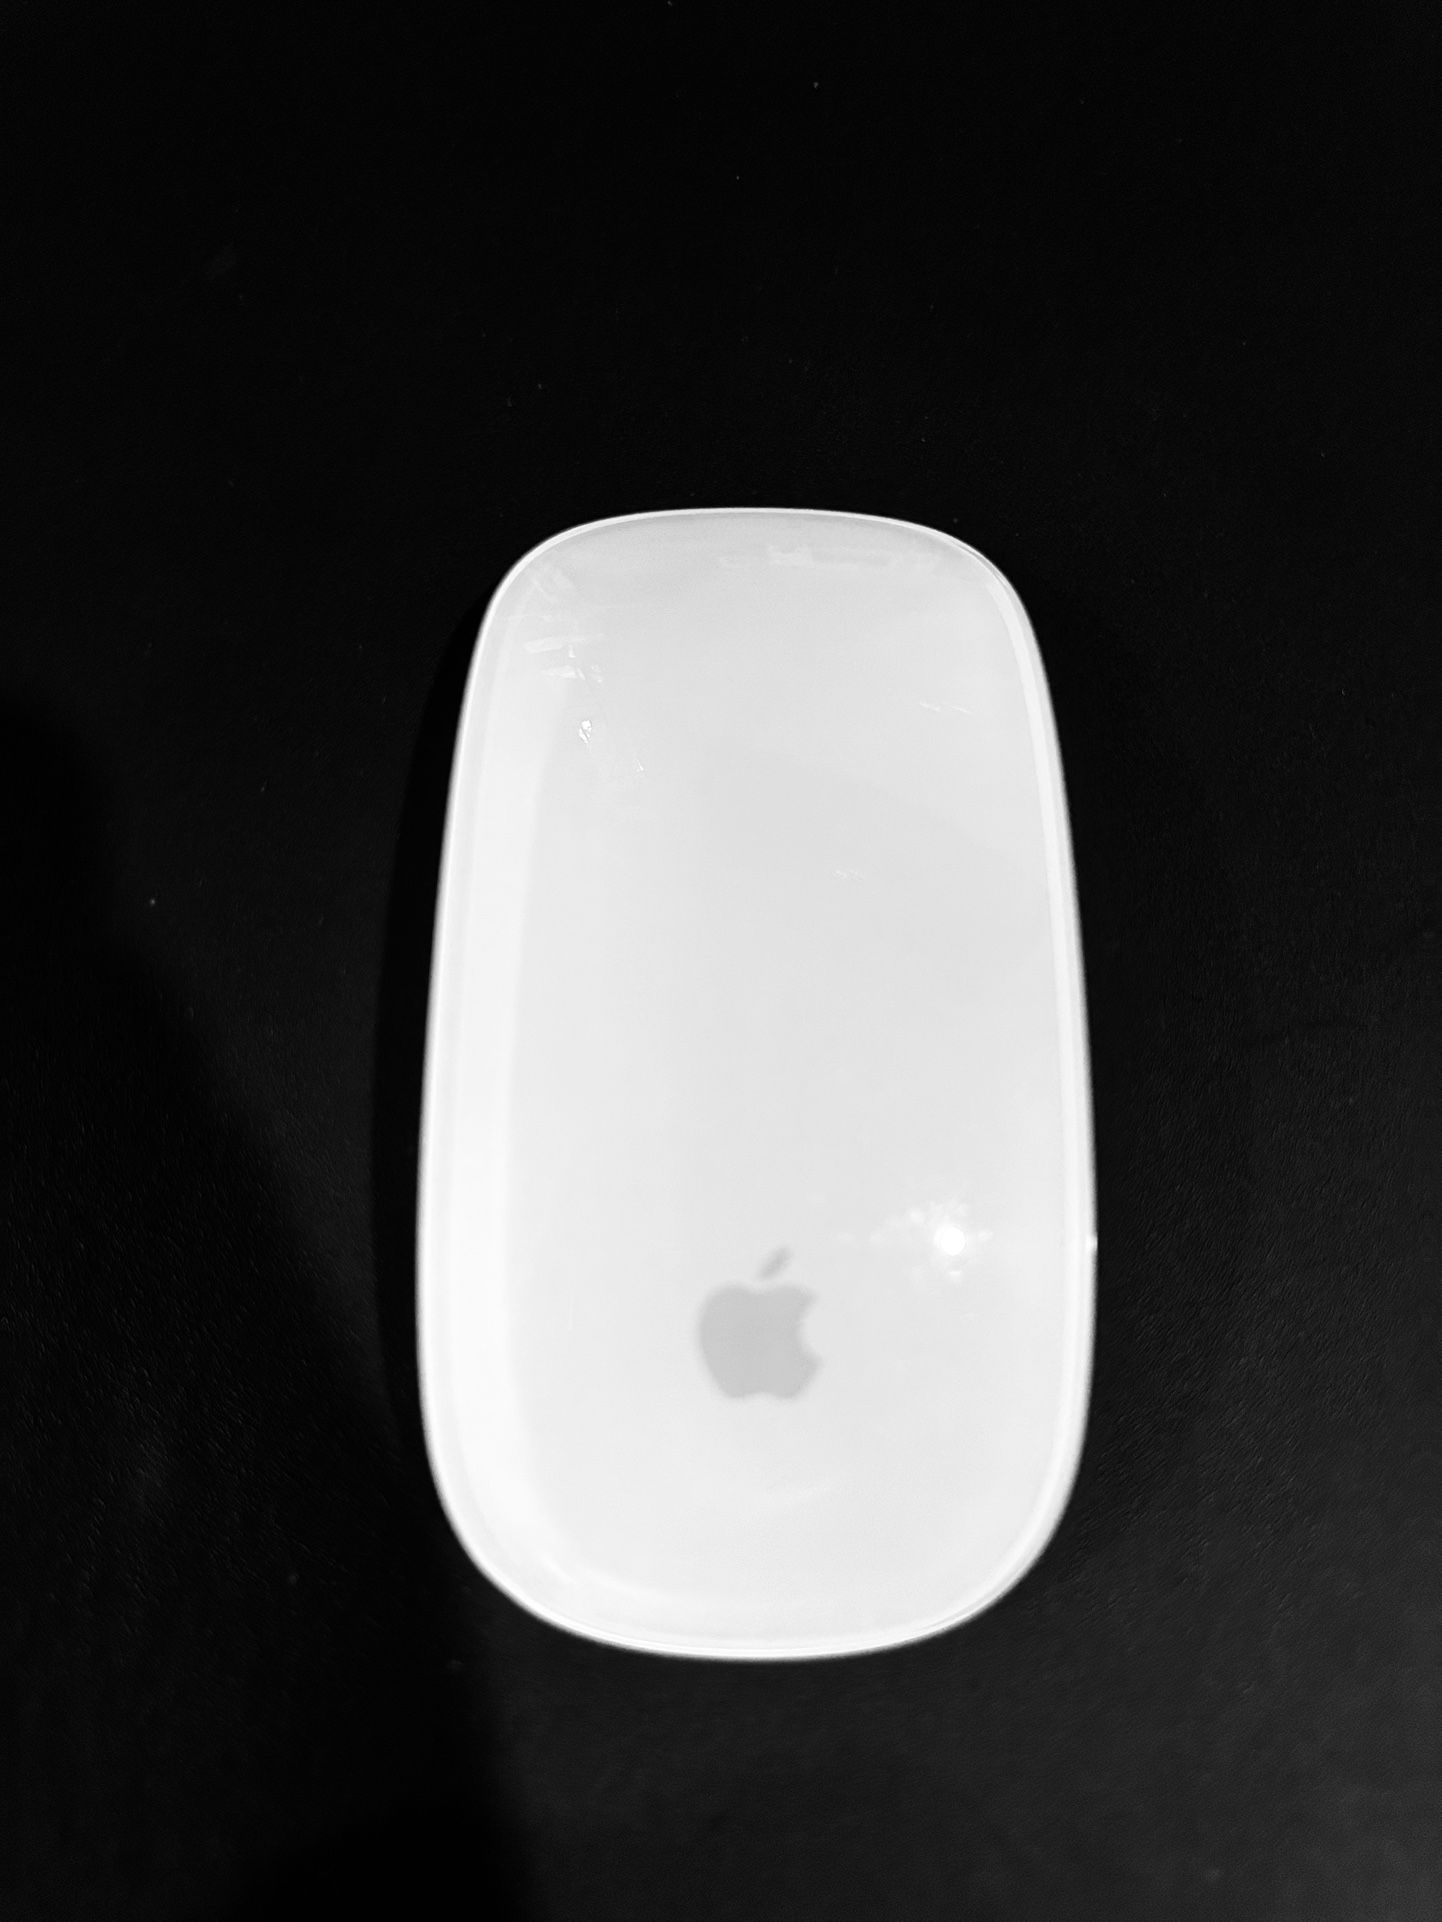 GENUINE Apple Bluetooth Wireless Laser Multi-Touch Magic Mouse - A1296